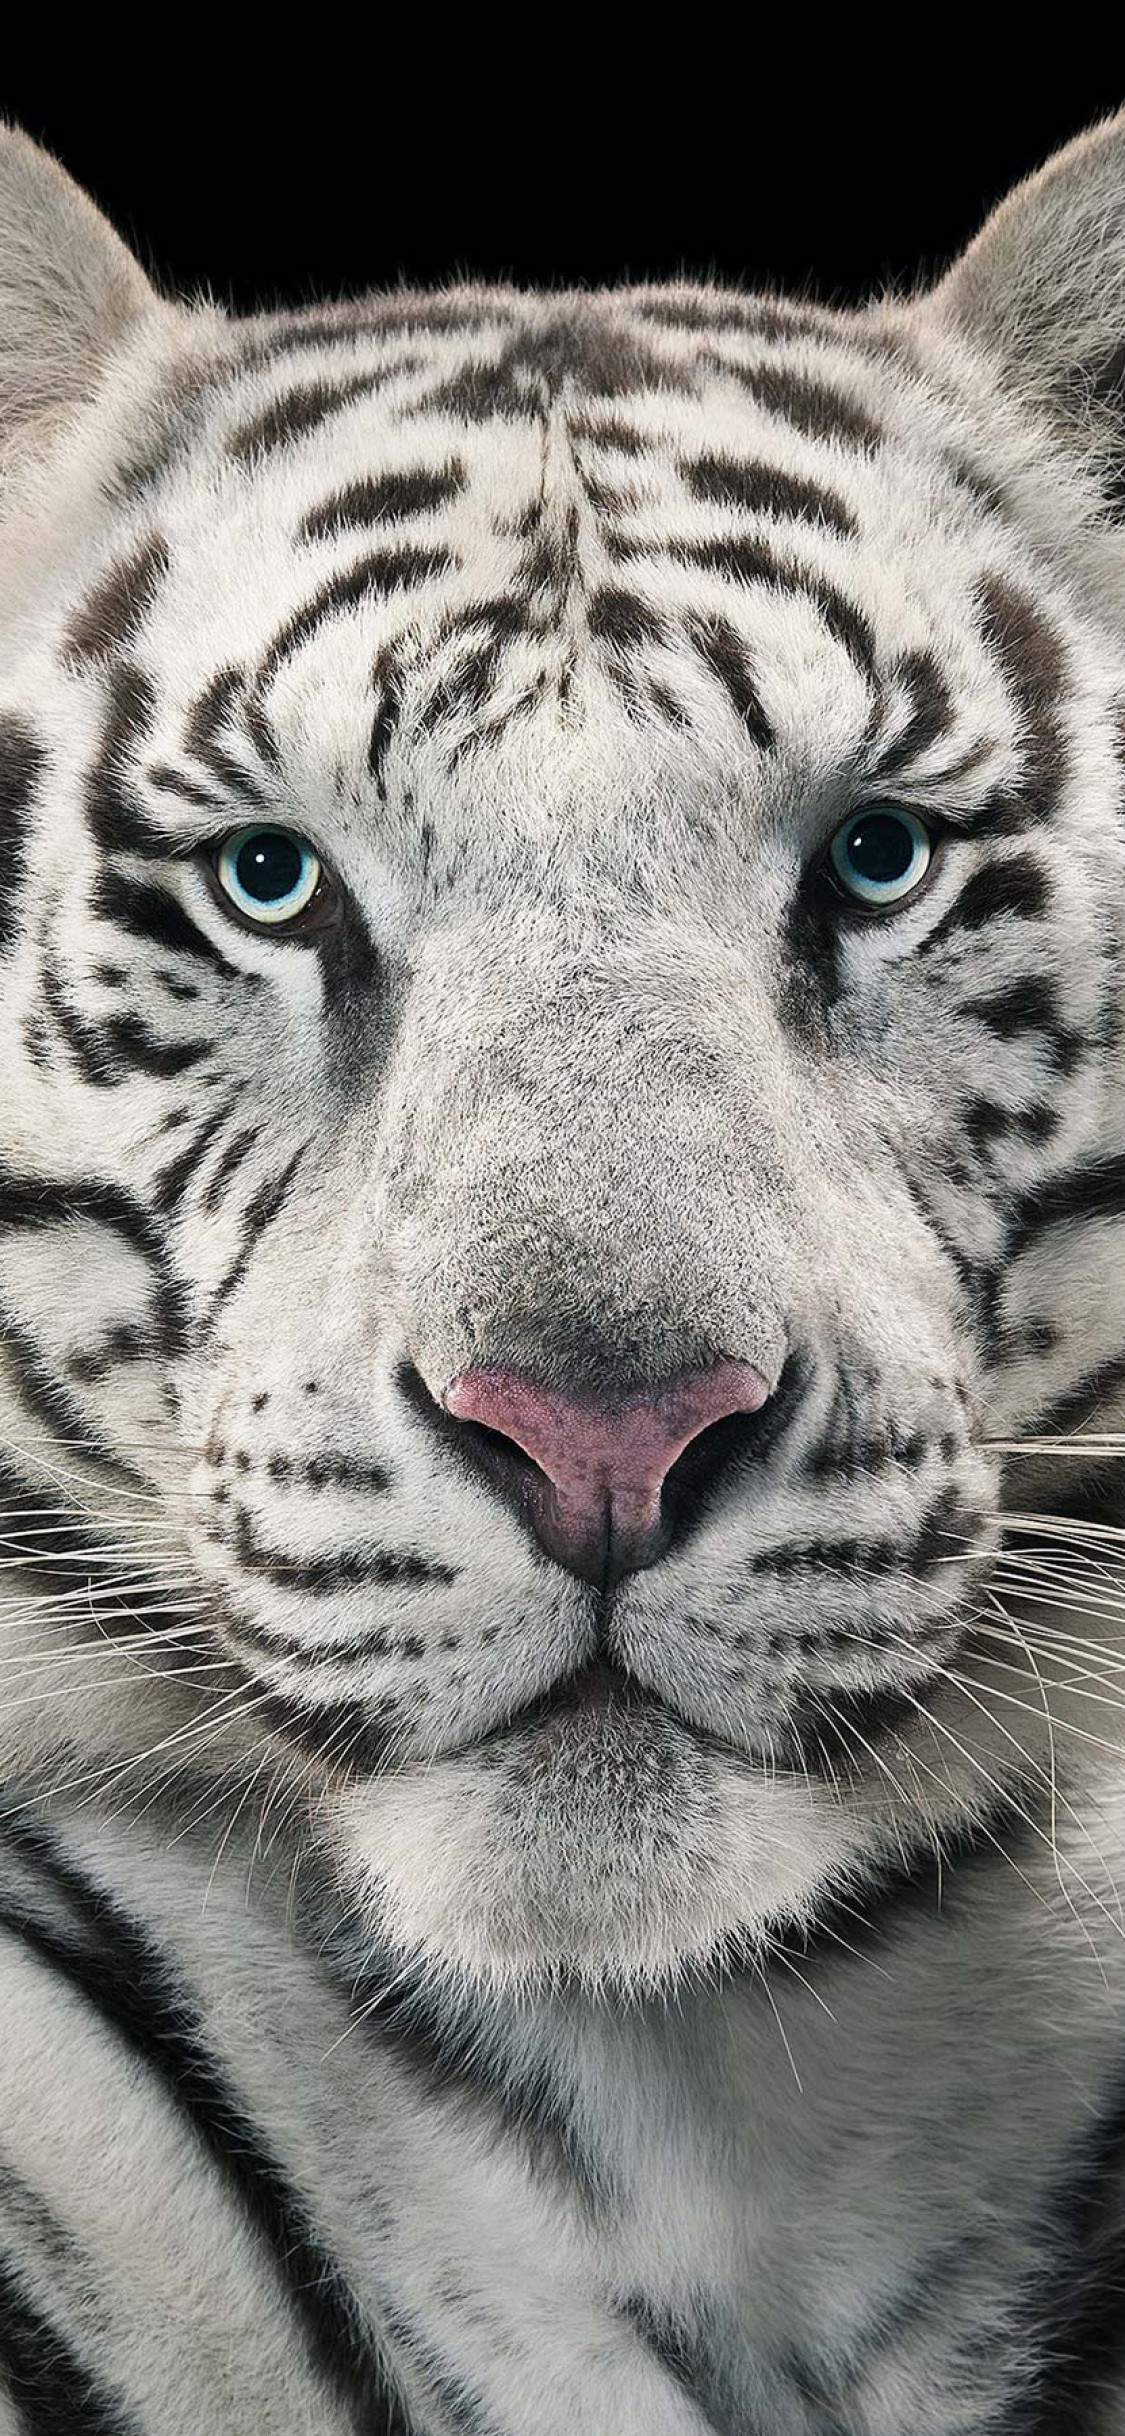 White Tiger, Close-up Face - White Tiger Wallpaper Hd For Iphone X - HD Wallpaper 